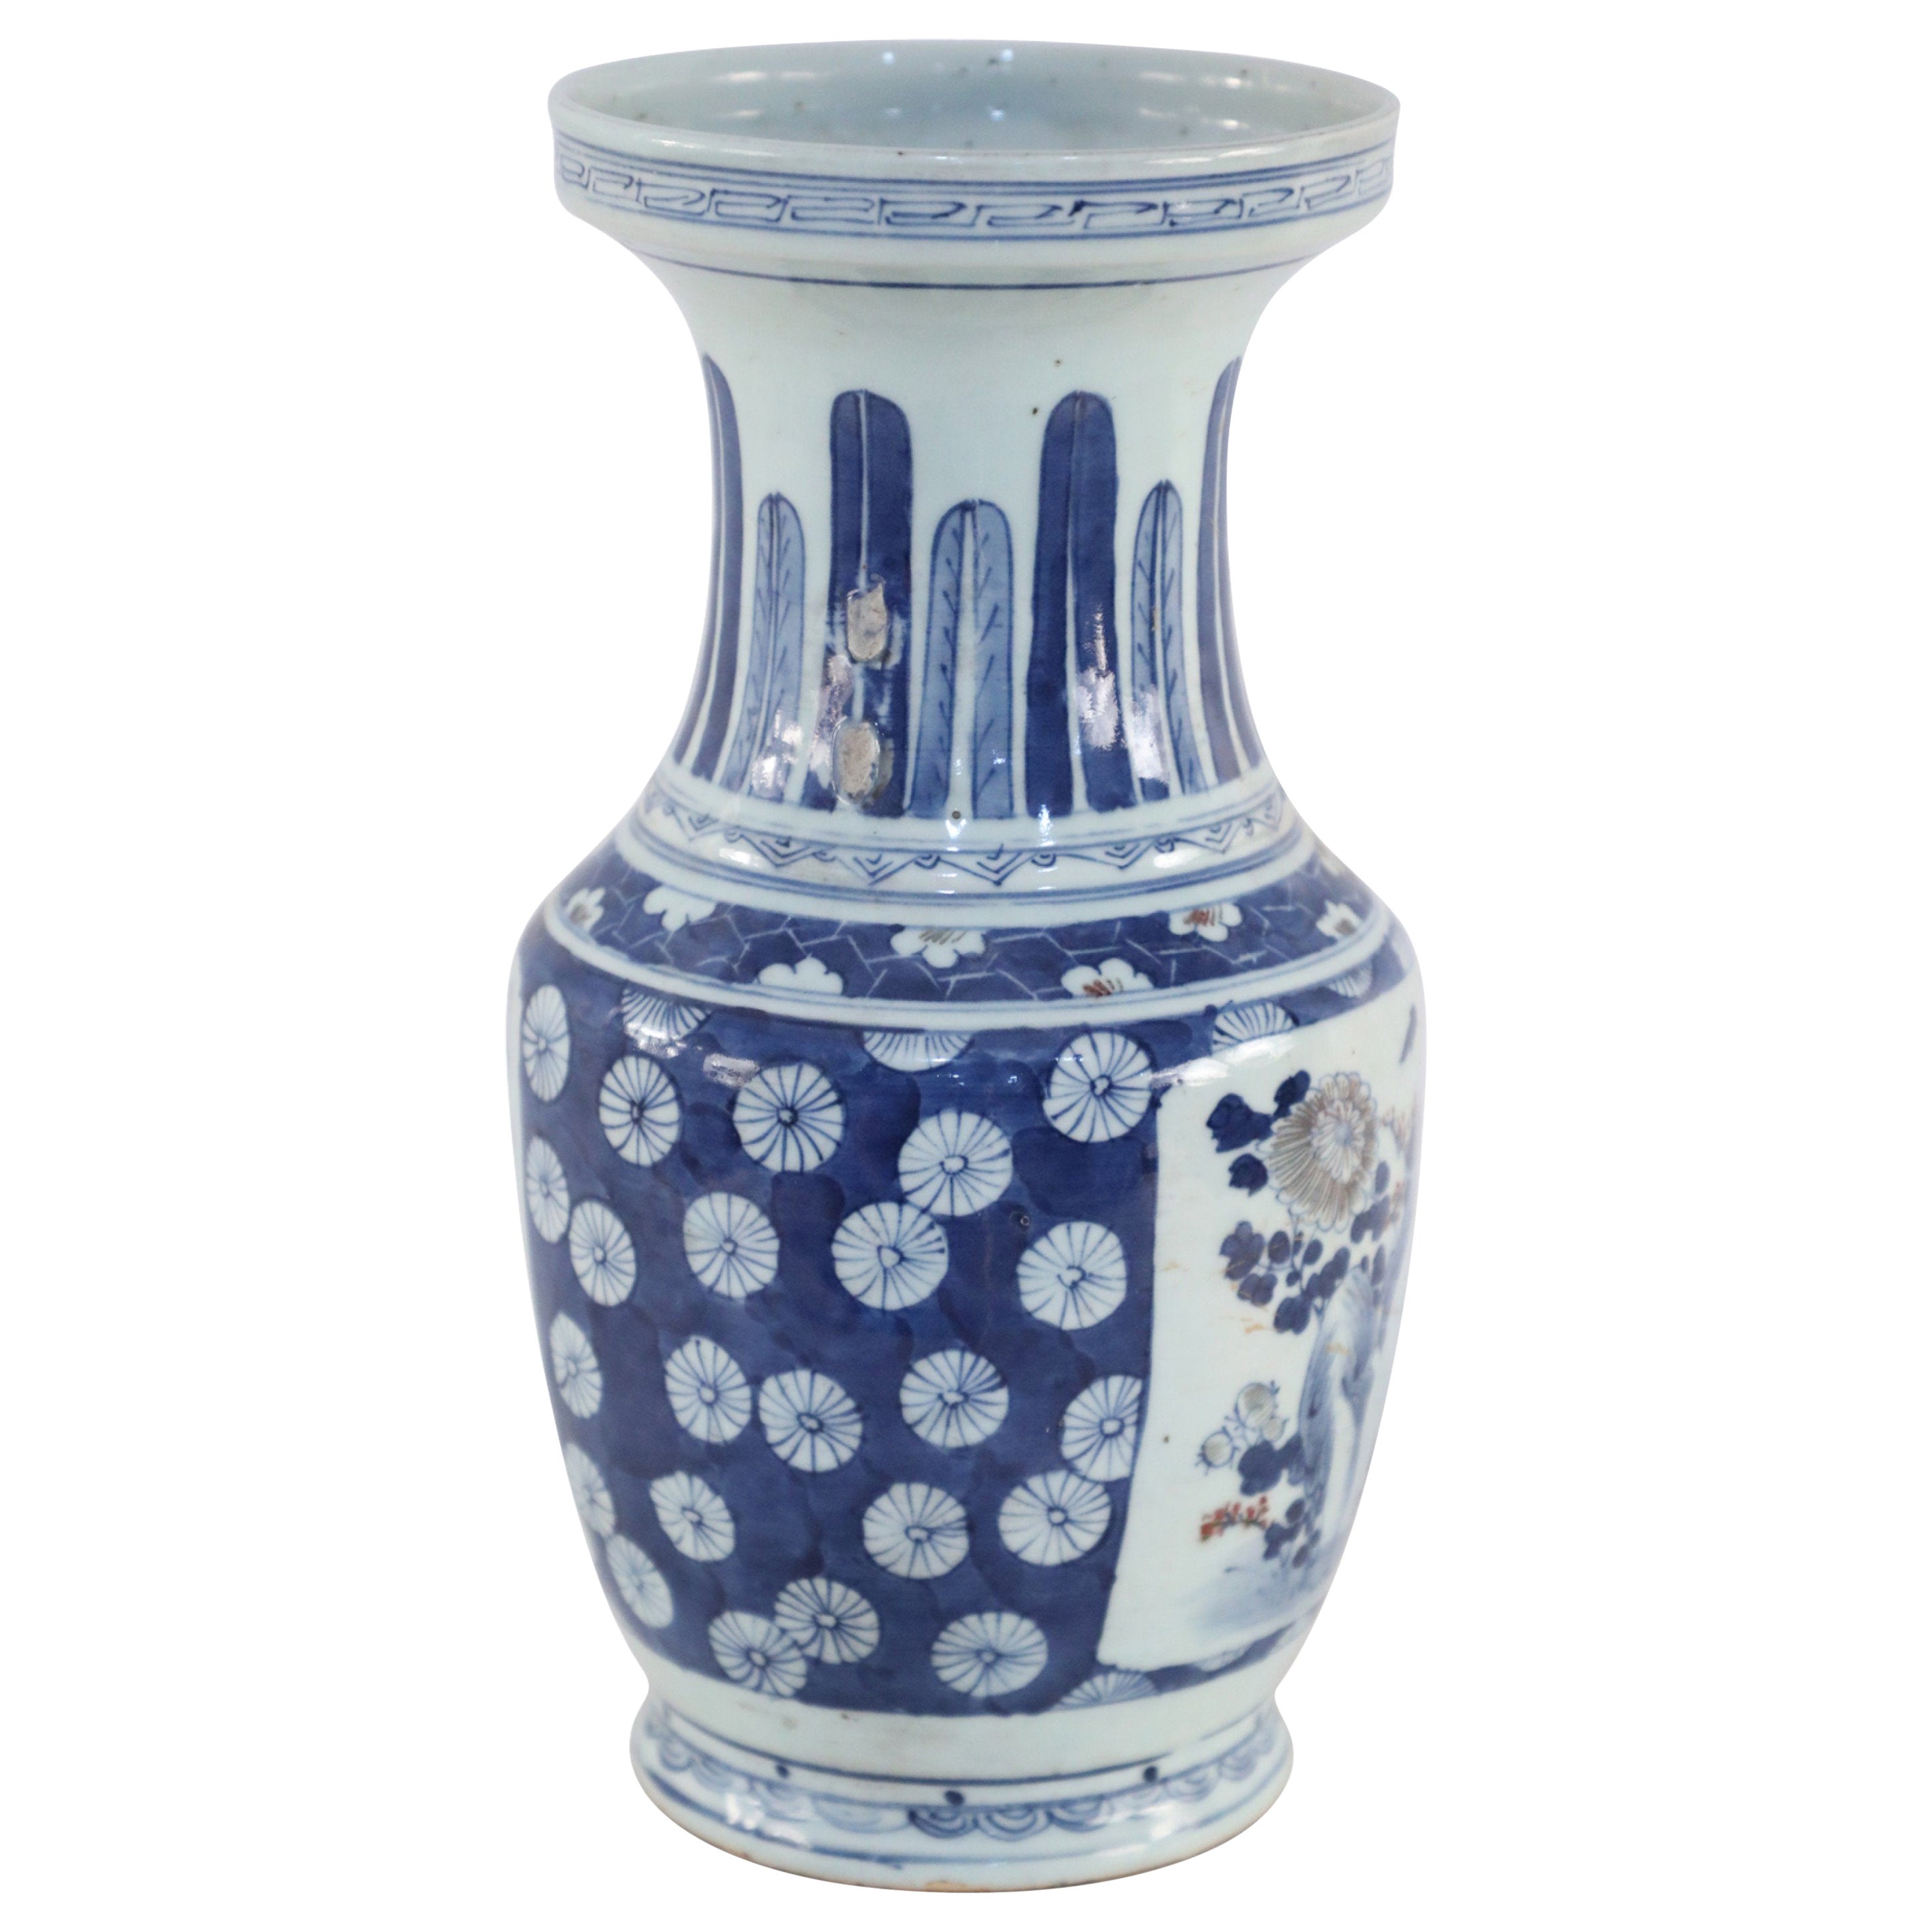 Chinese White and Blue Floral and Feather Motif Porcelain Urn